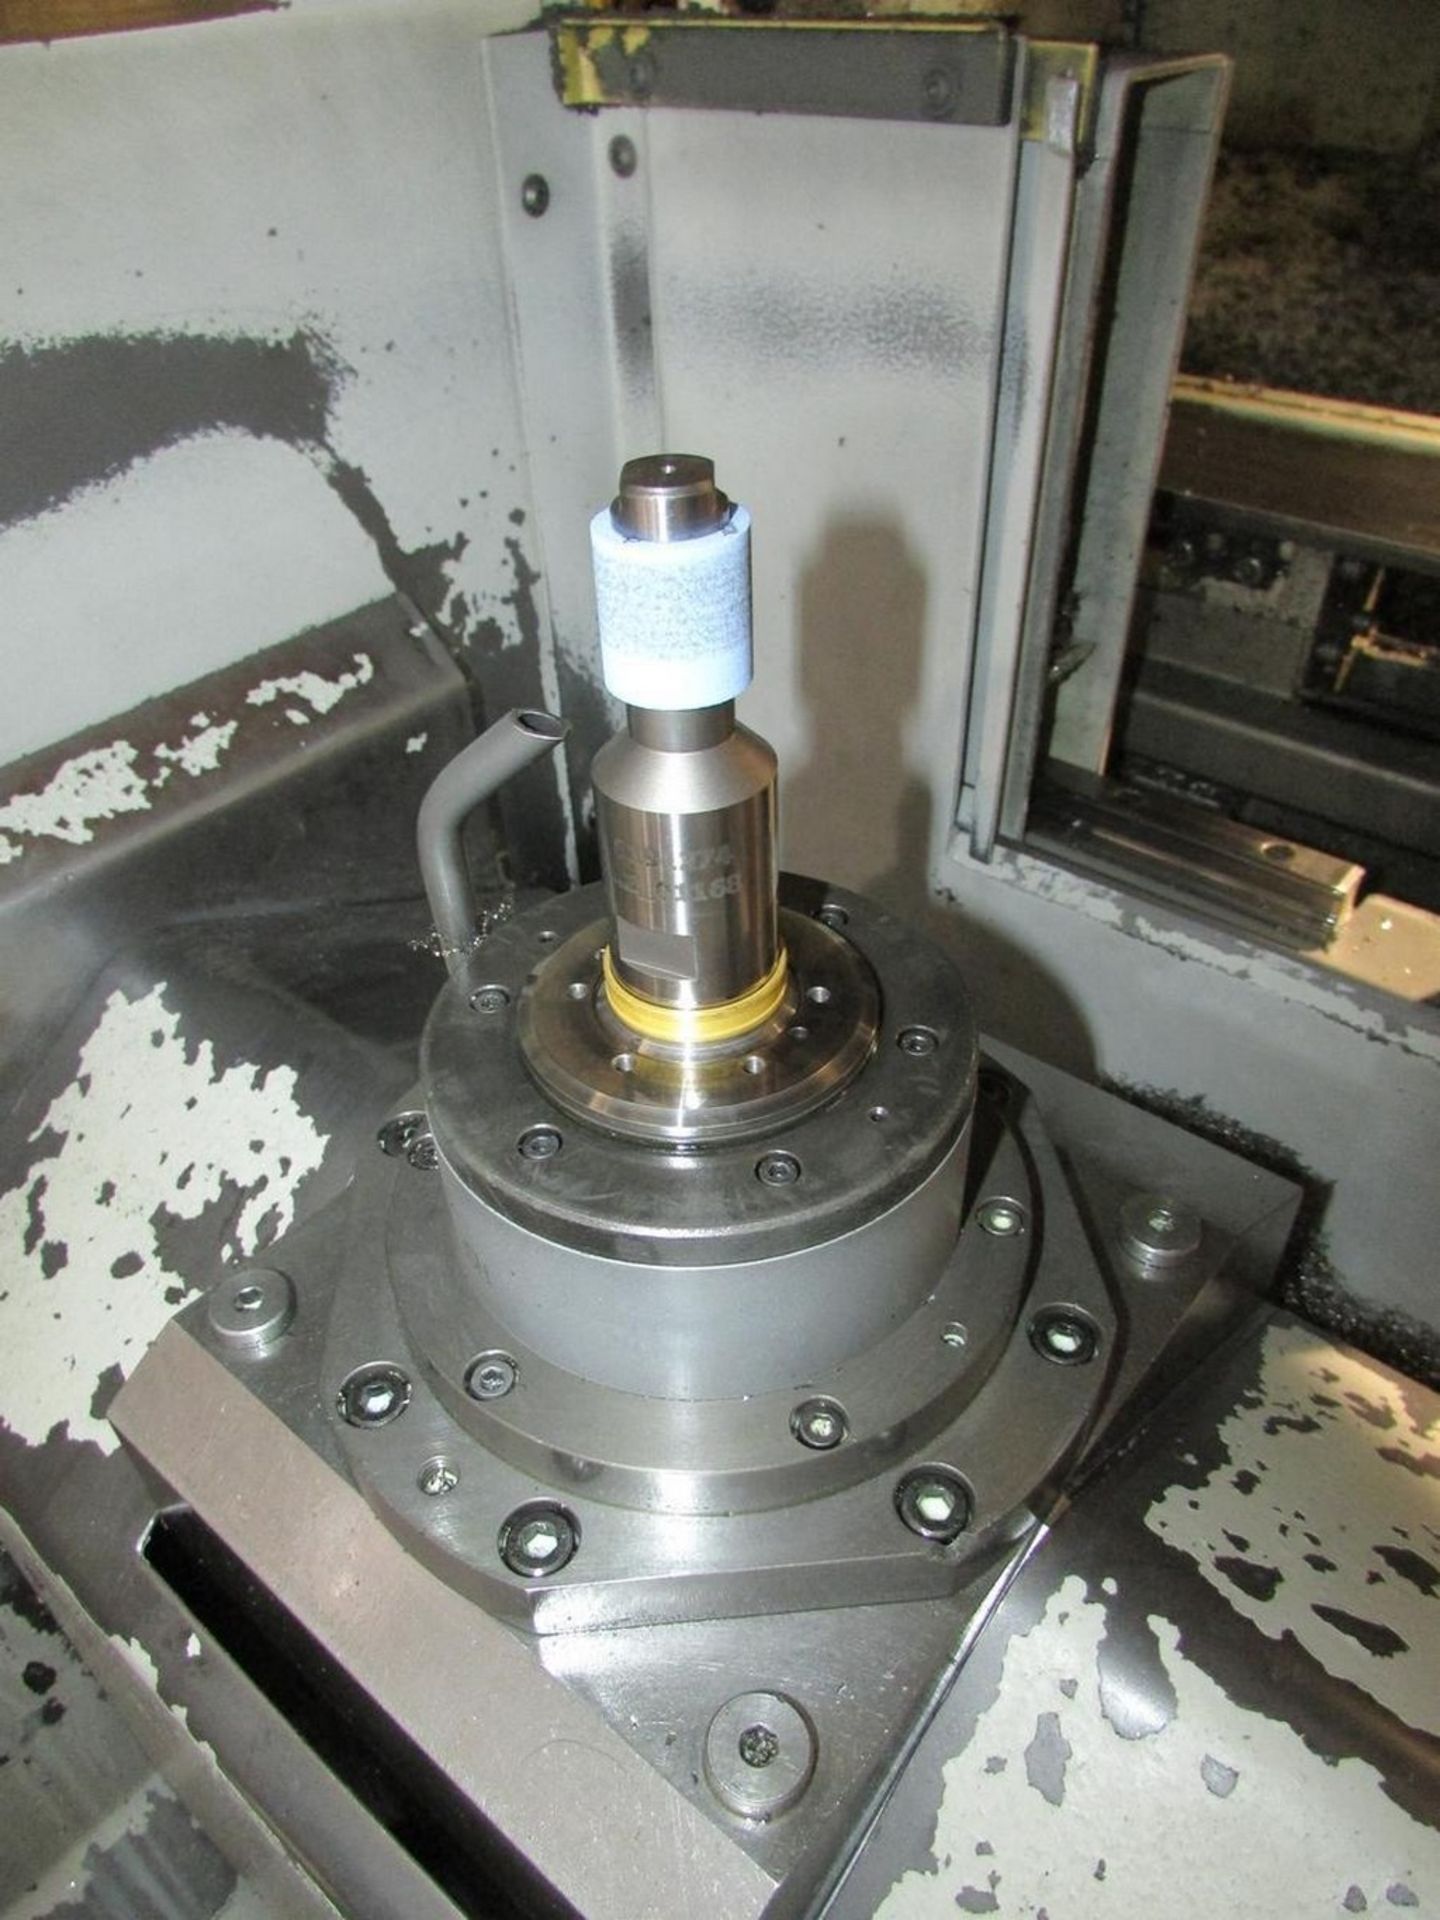 Emag Reinecker VSC-250-DDS CNC Vertical Hard Turning and Finish Grinding Machine, M762.56845 - Image 8 of 11